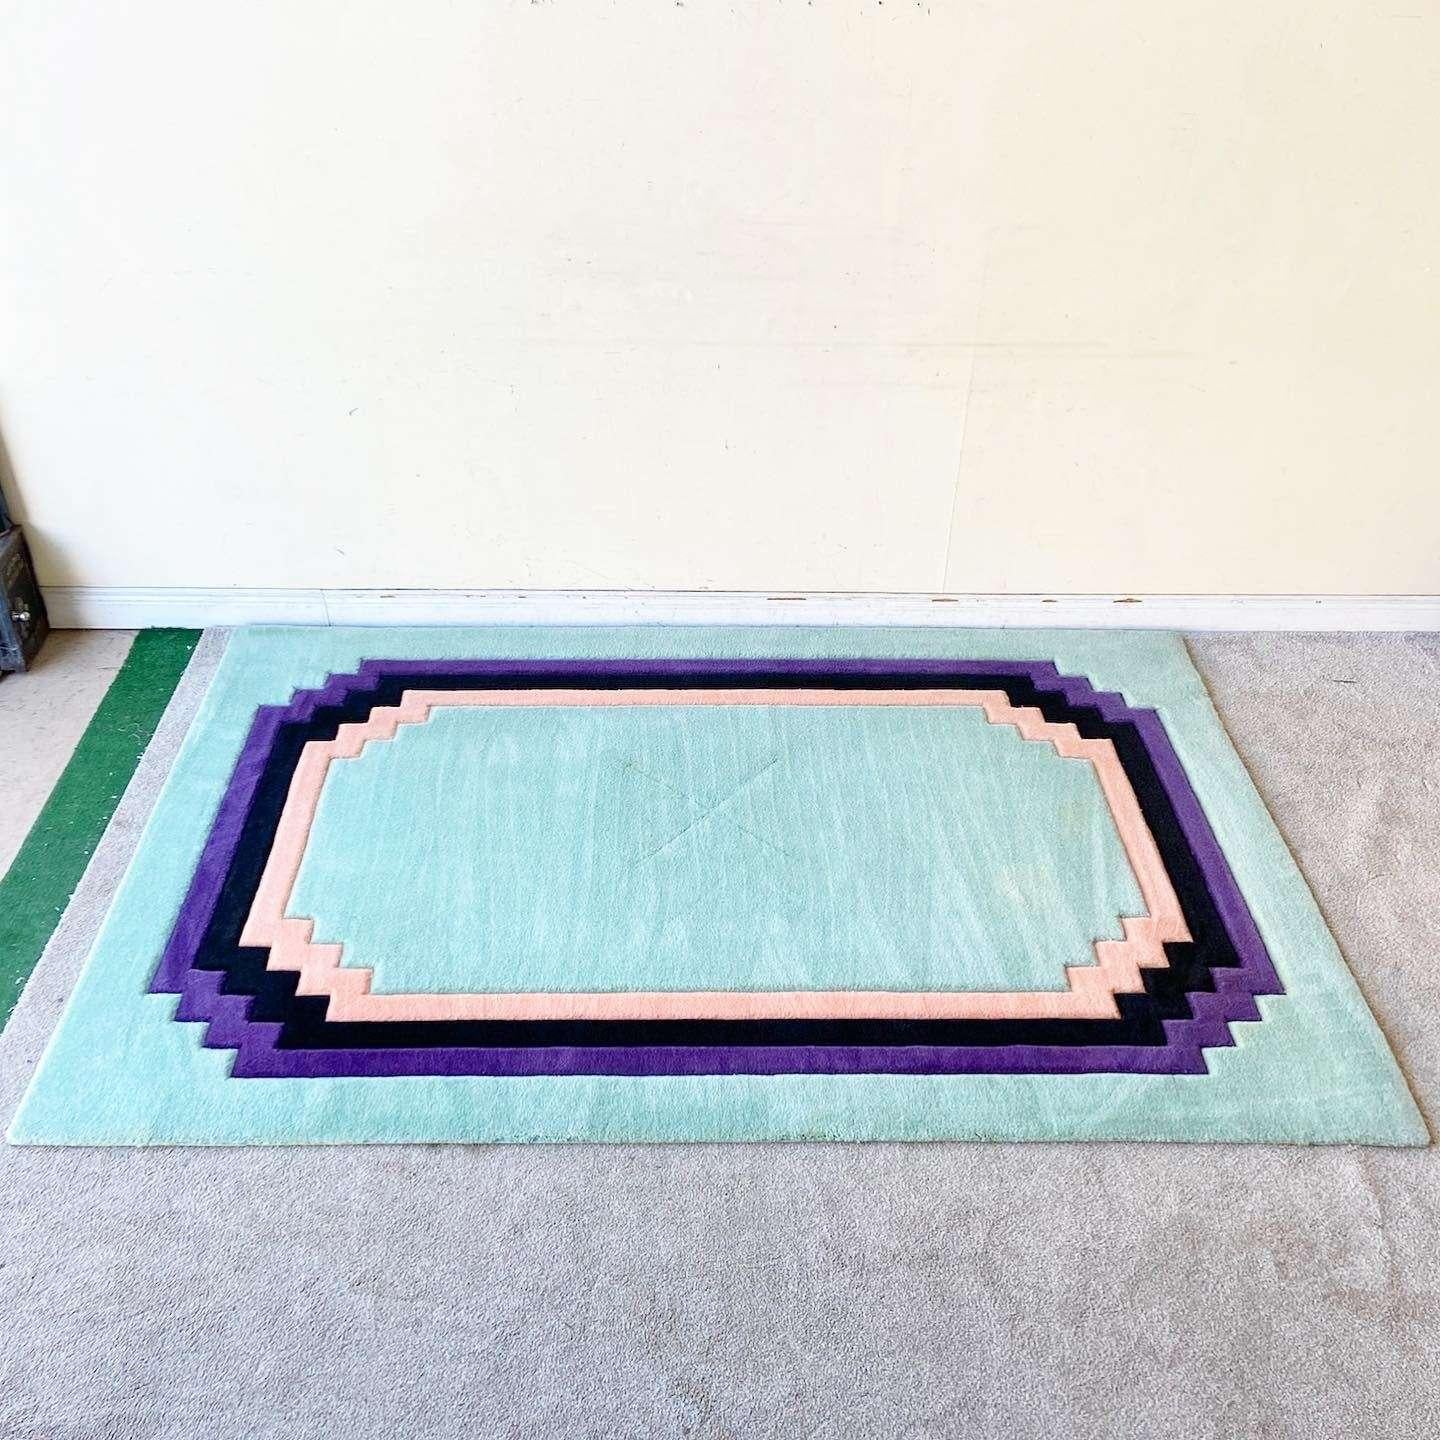 Amazing vintage art deco/postmodern rectangular area rug. Features a minty green interior and outer edge bordered by purple, black and pink sculpted stripes.

Rug 43
